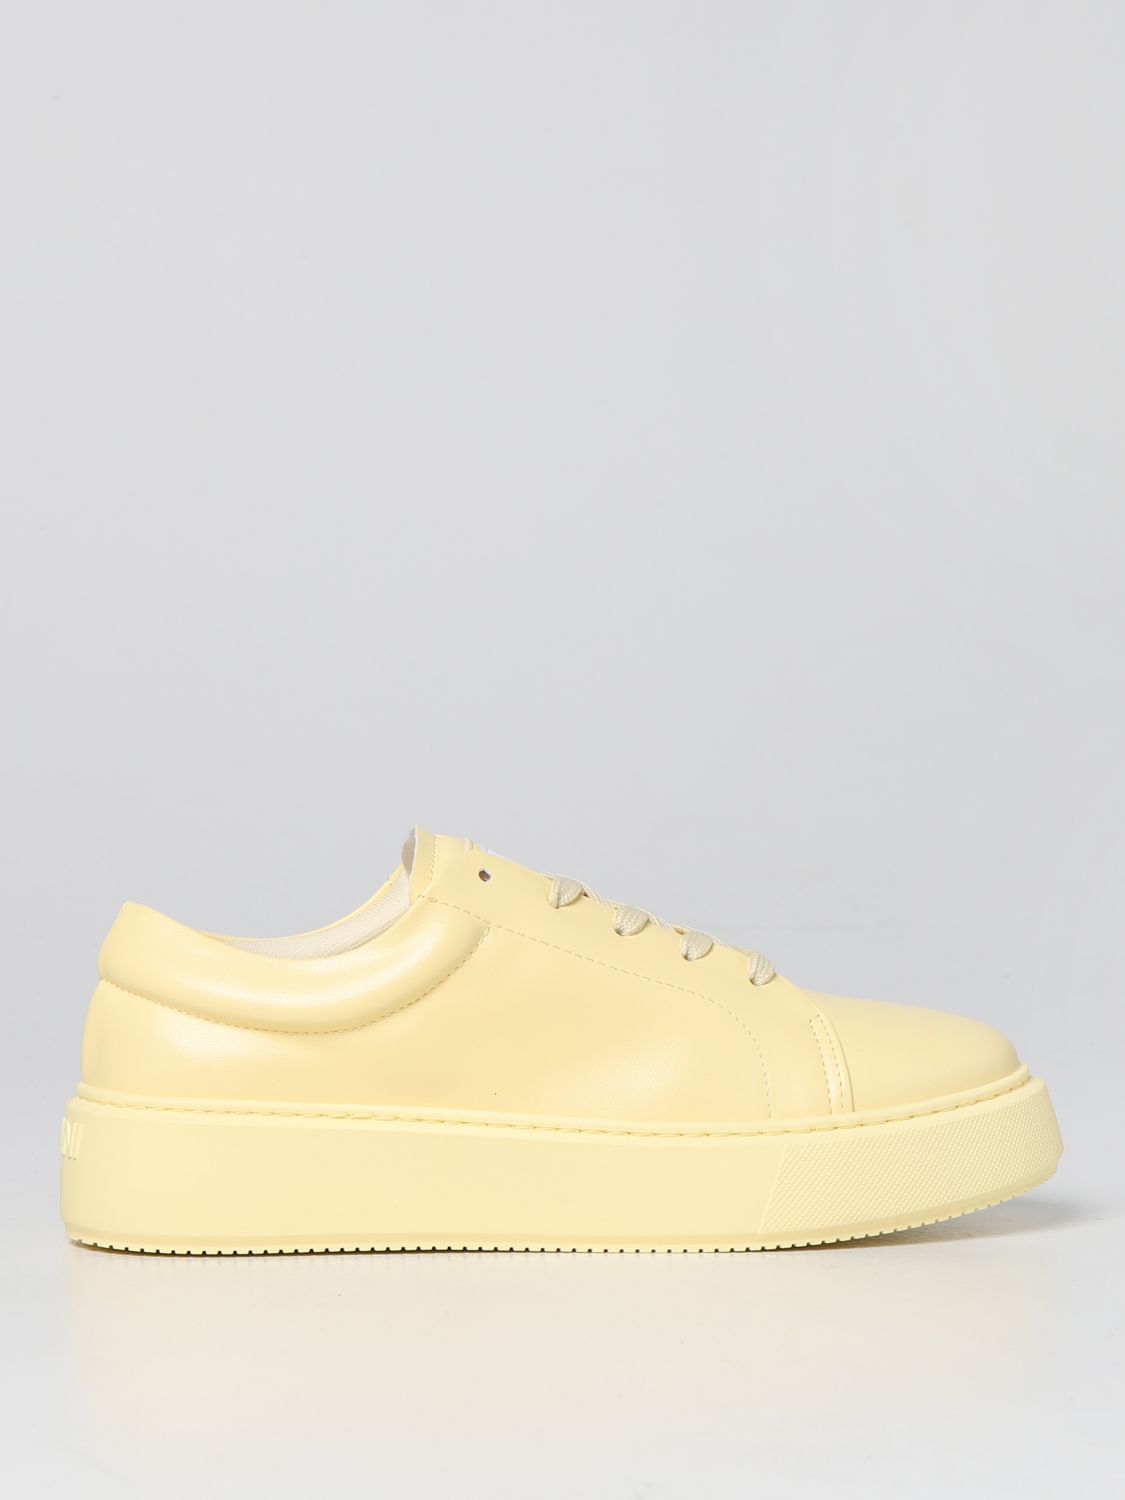 instinkt fløjte Svig GANNI: Sporty synthetic leather sneakers - Yellow | Ganni sneakers S1789  online on GIGLIO.COM